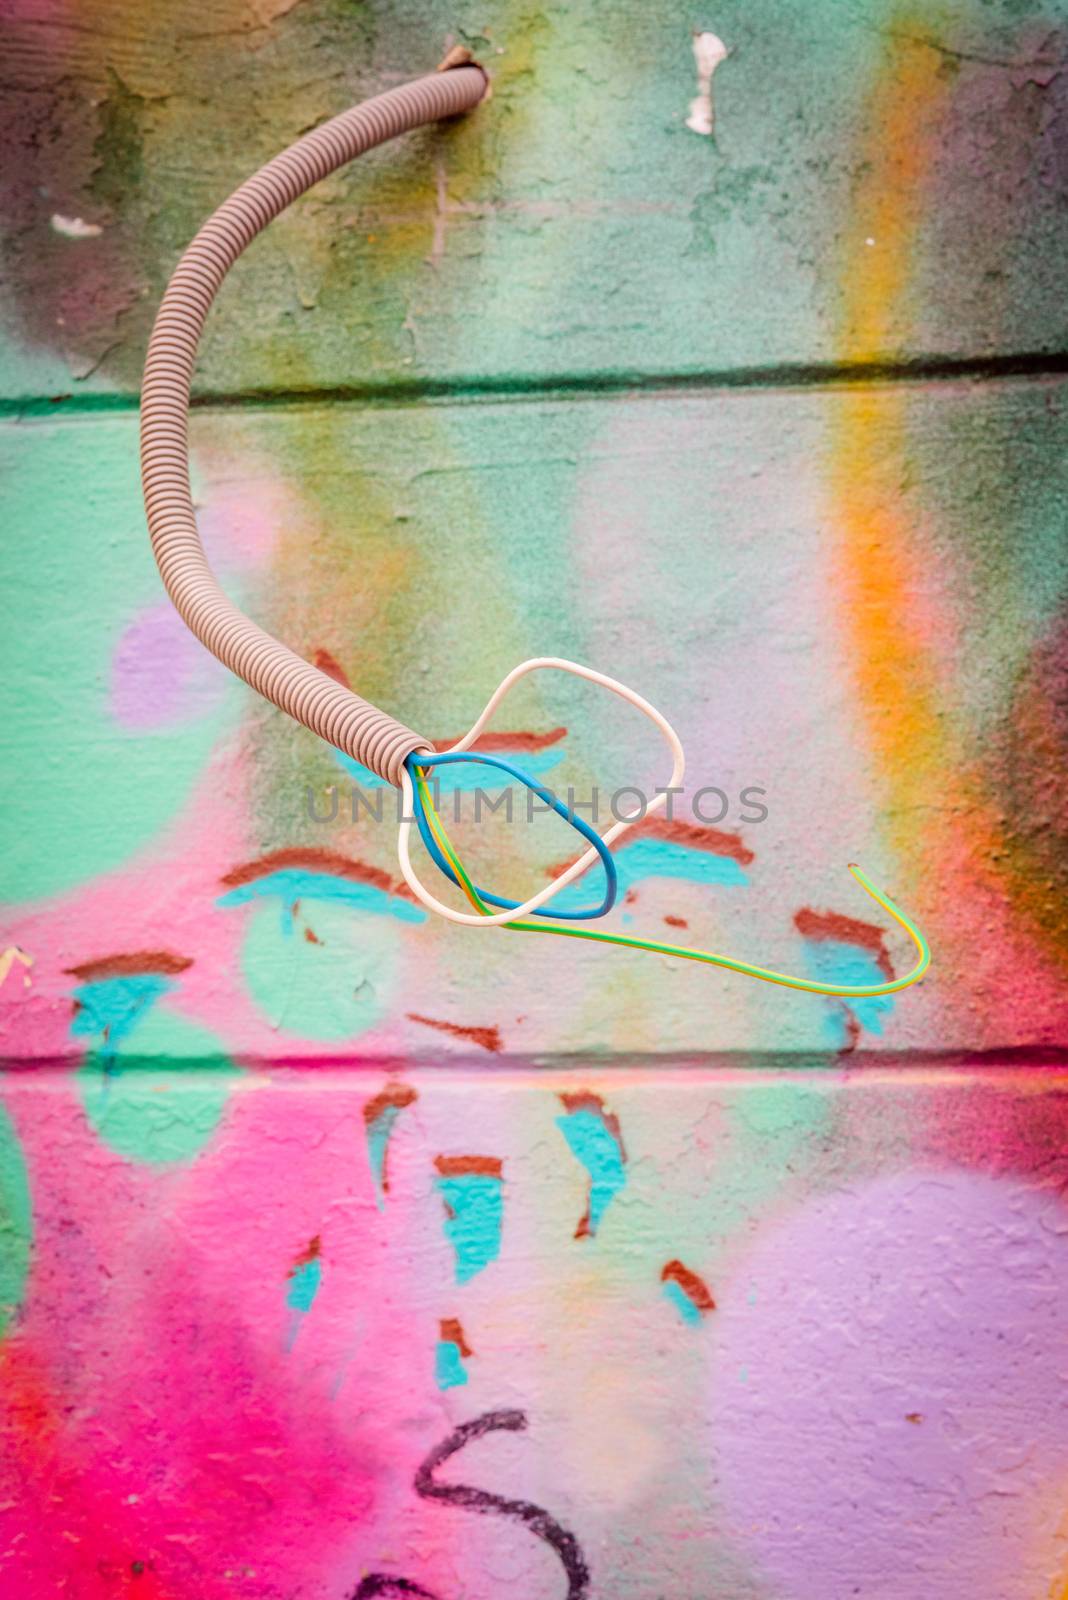 Wires coming out of a grungy wall with grafitti by Sportactive